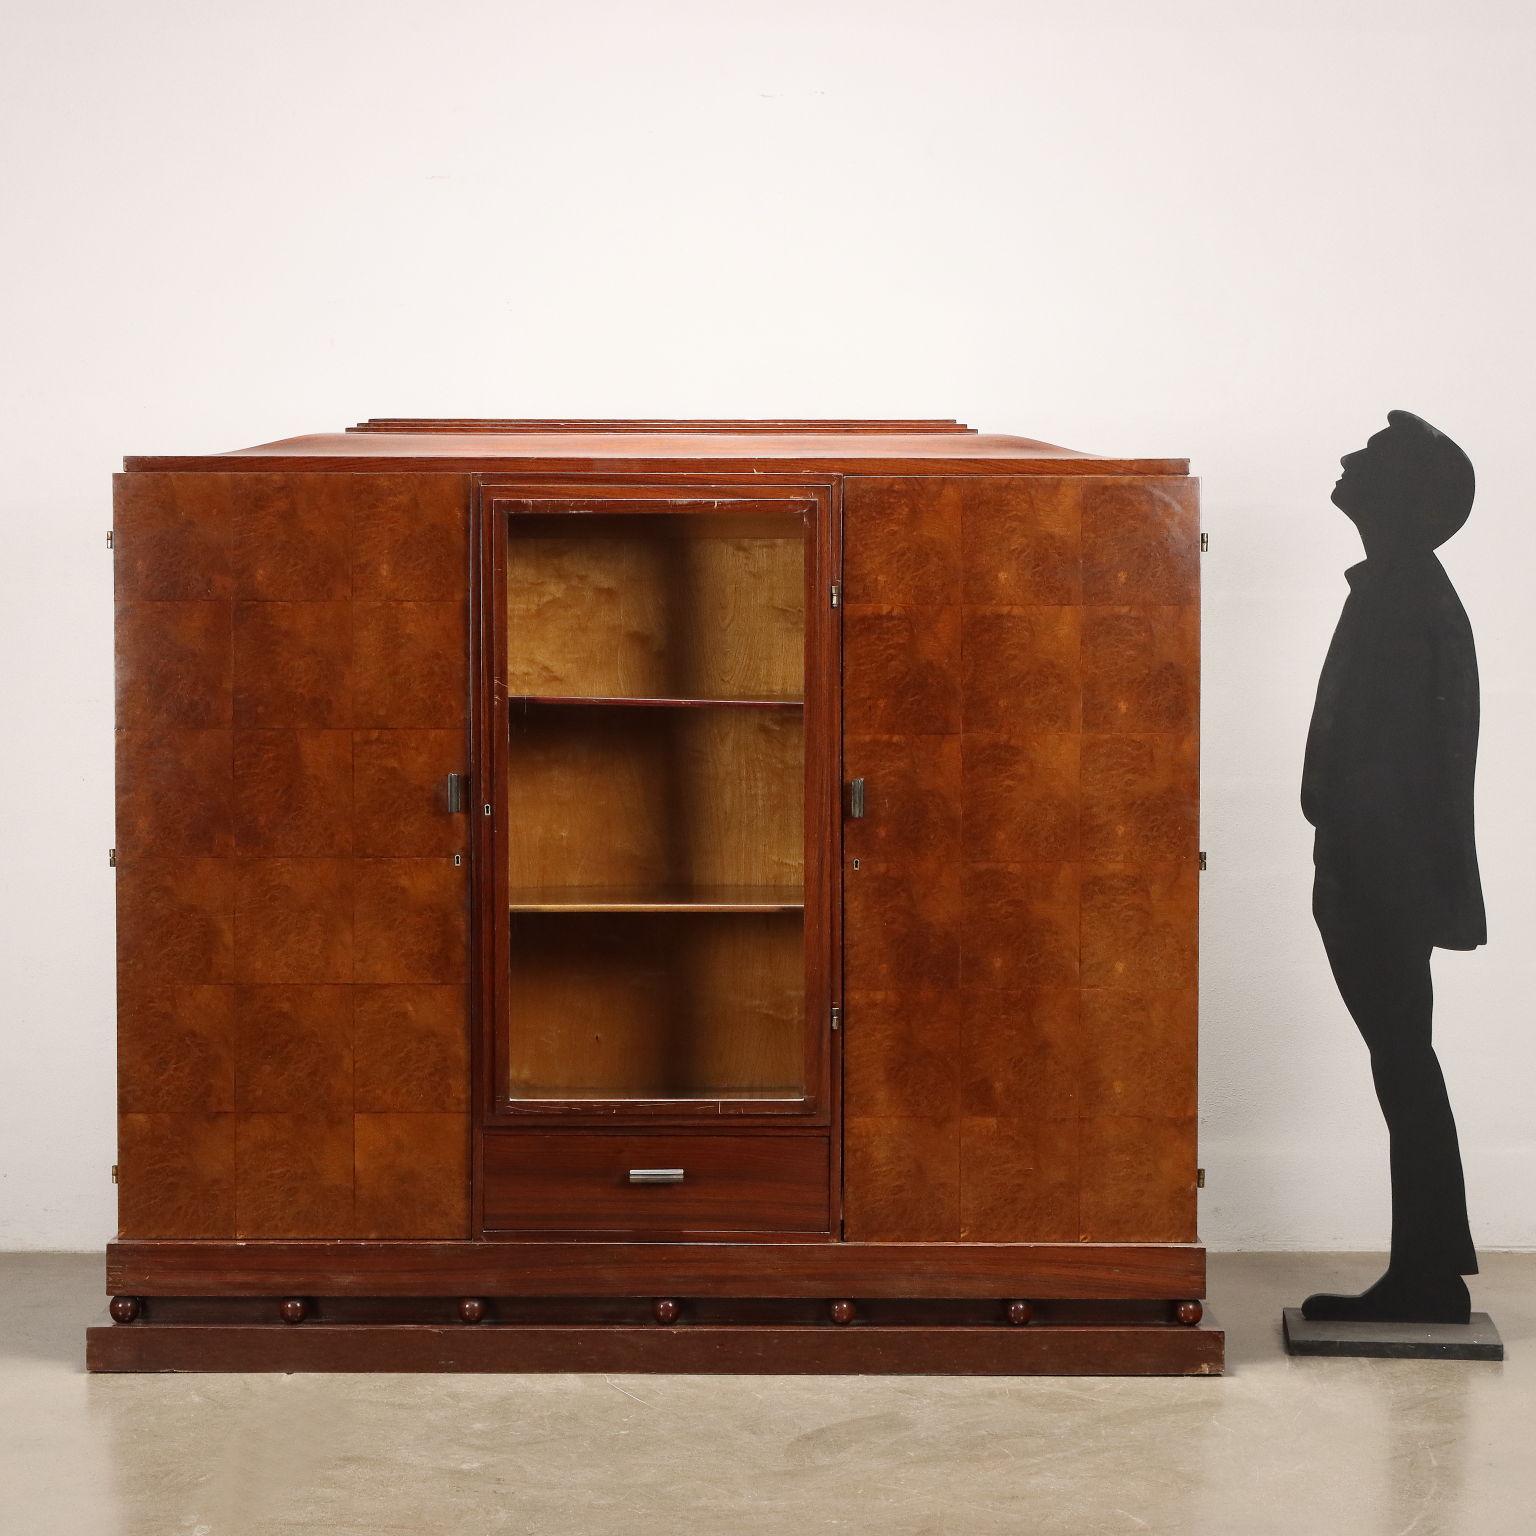 Sideboard cabinet with central display case, opening with hinged doors, made of walnut veneer and burl wood. 